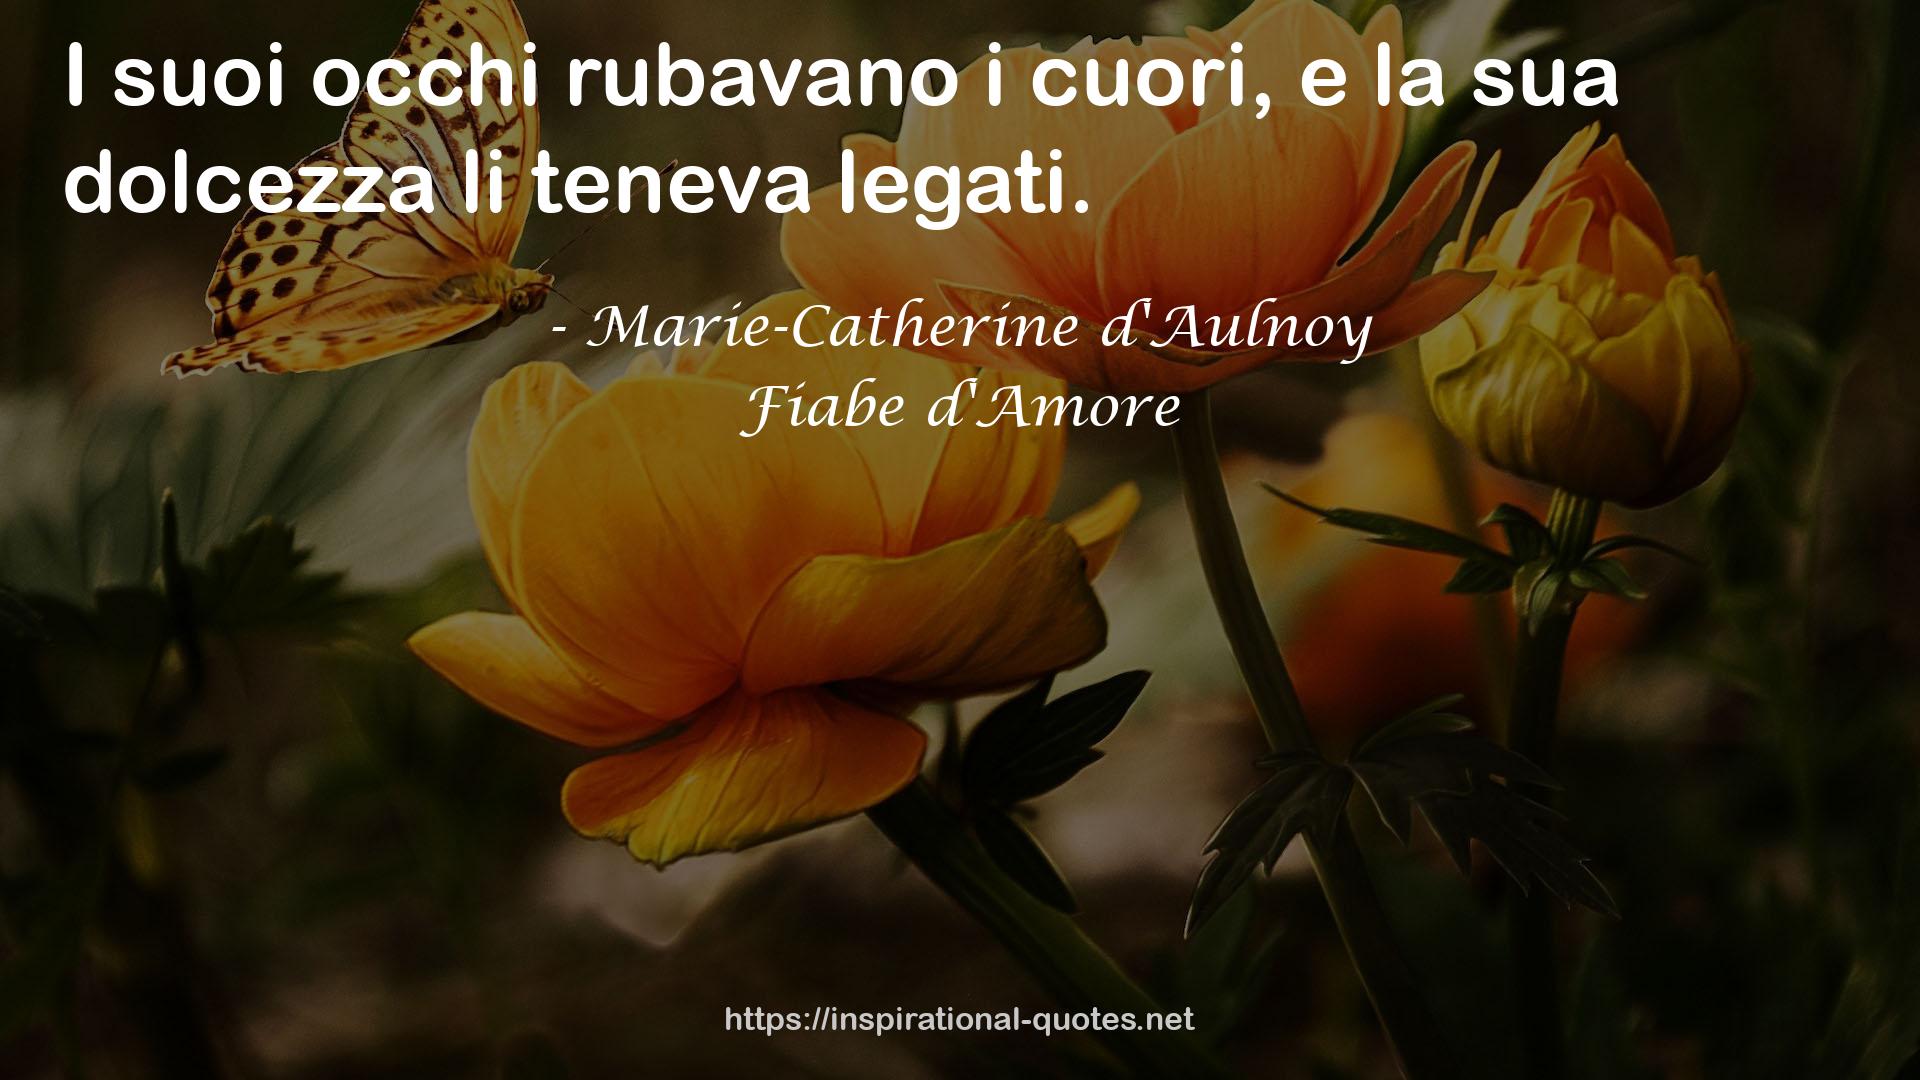 Fiabe d'Amore QUOTES